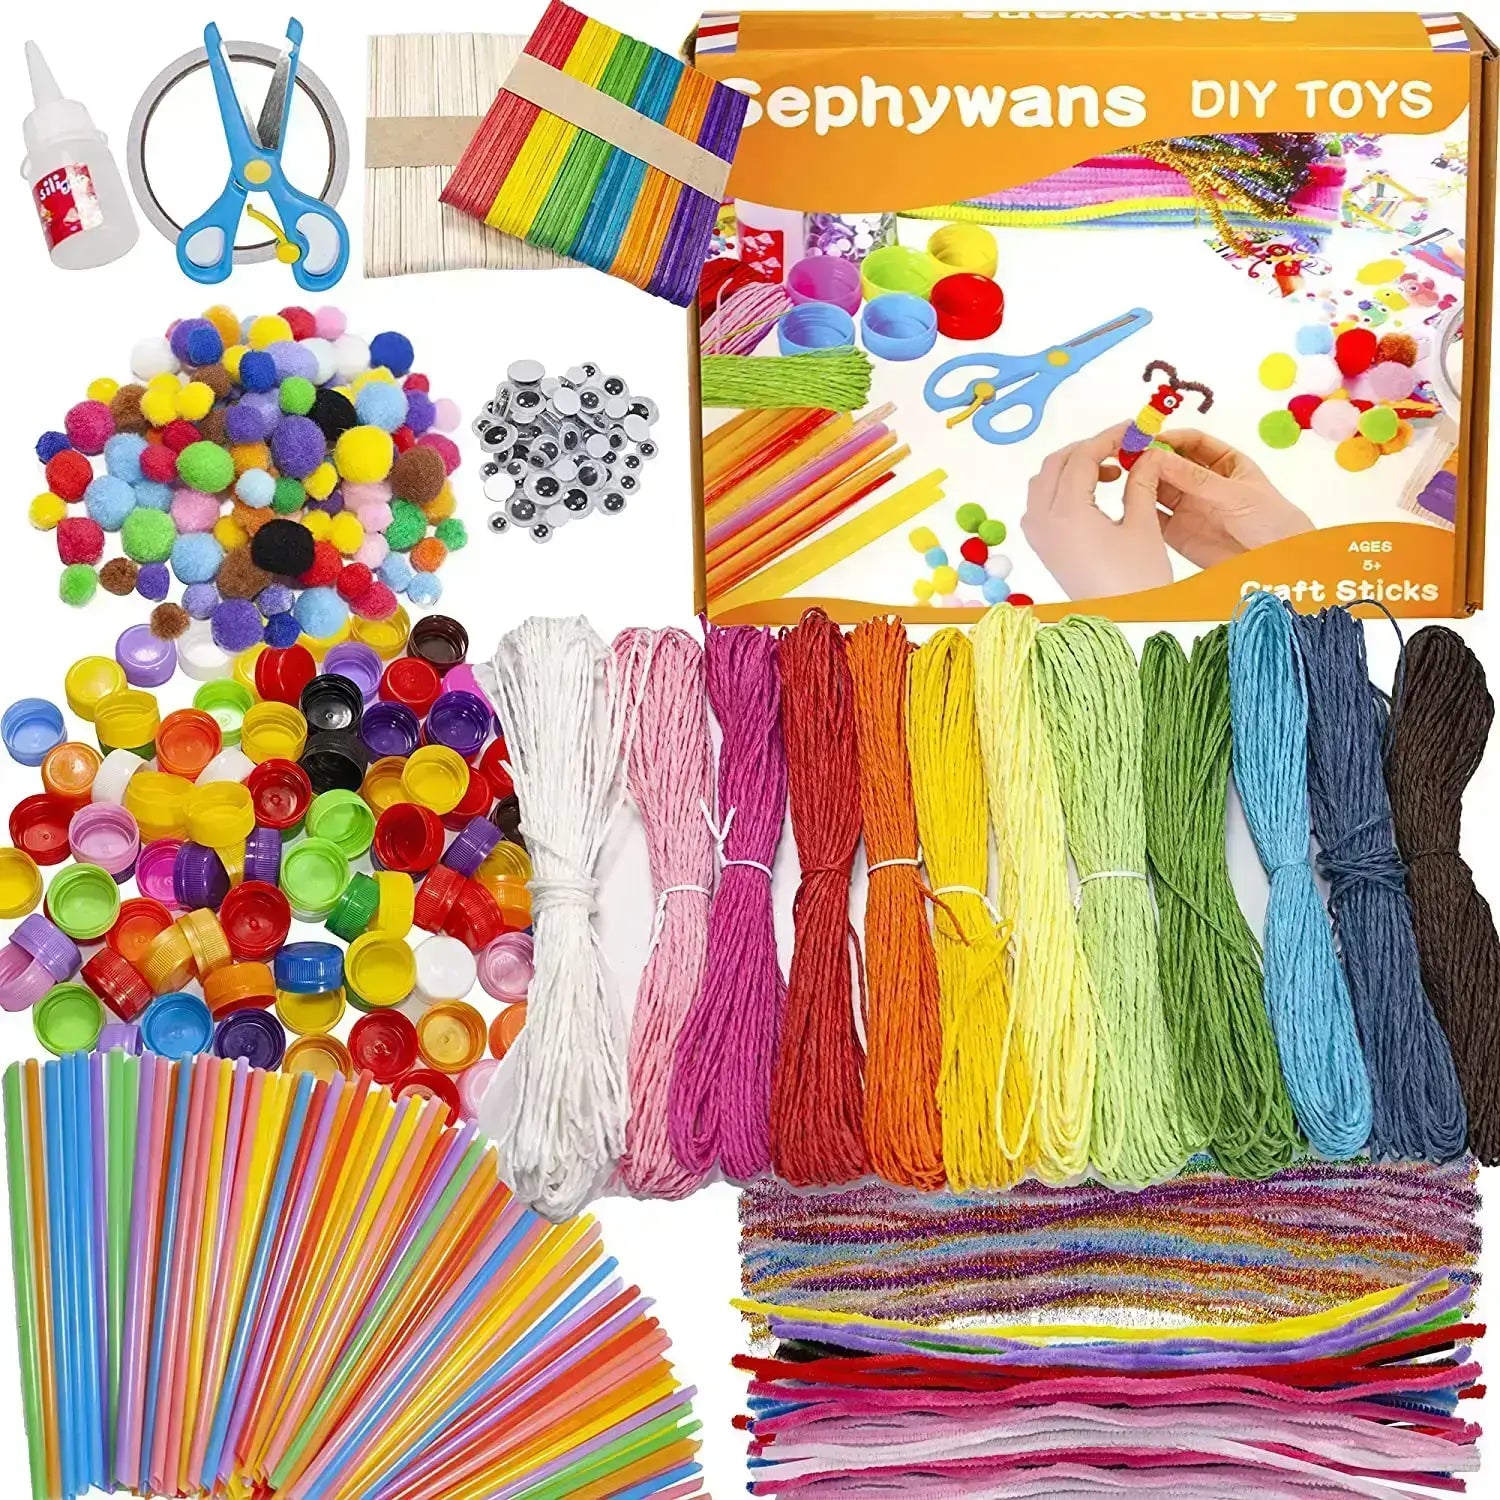 Sephywans Arts and Crafts Supplies Kit, Include Variety of